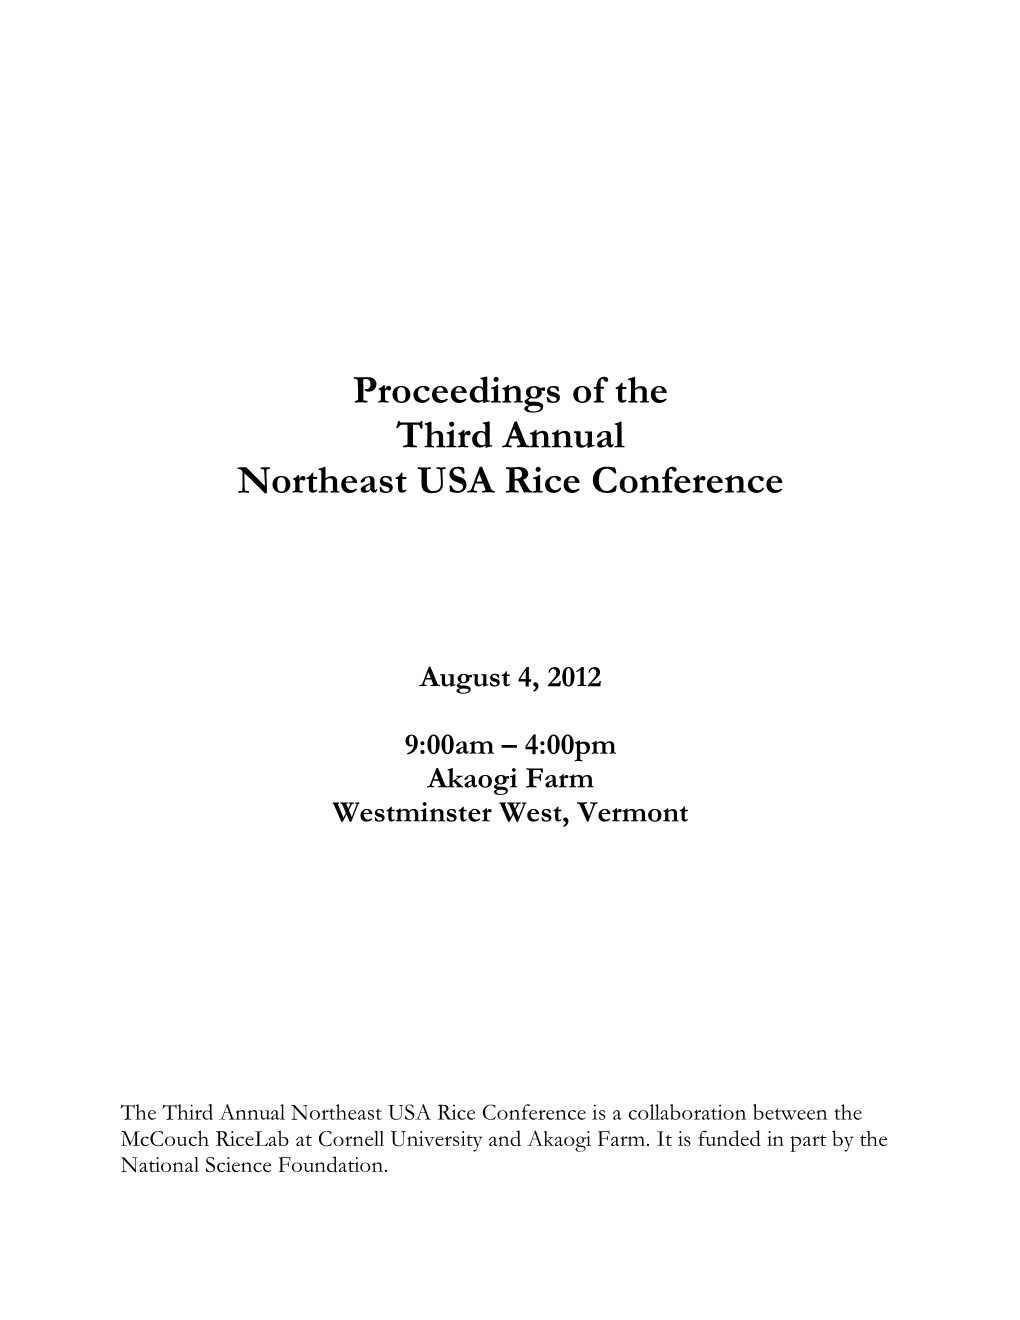 Proceedings of the Third Annual Northeast USA Rice Conference